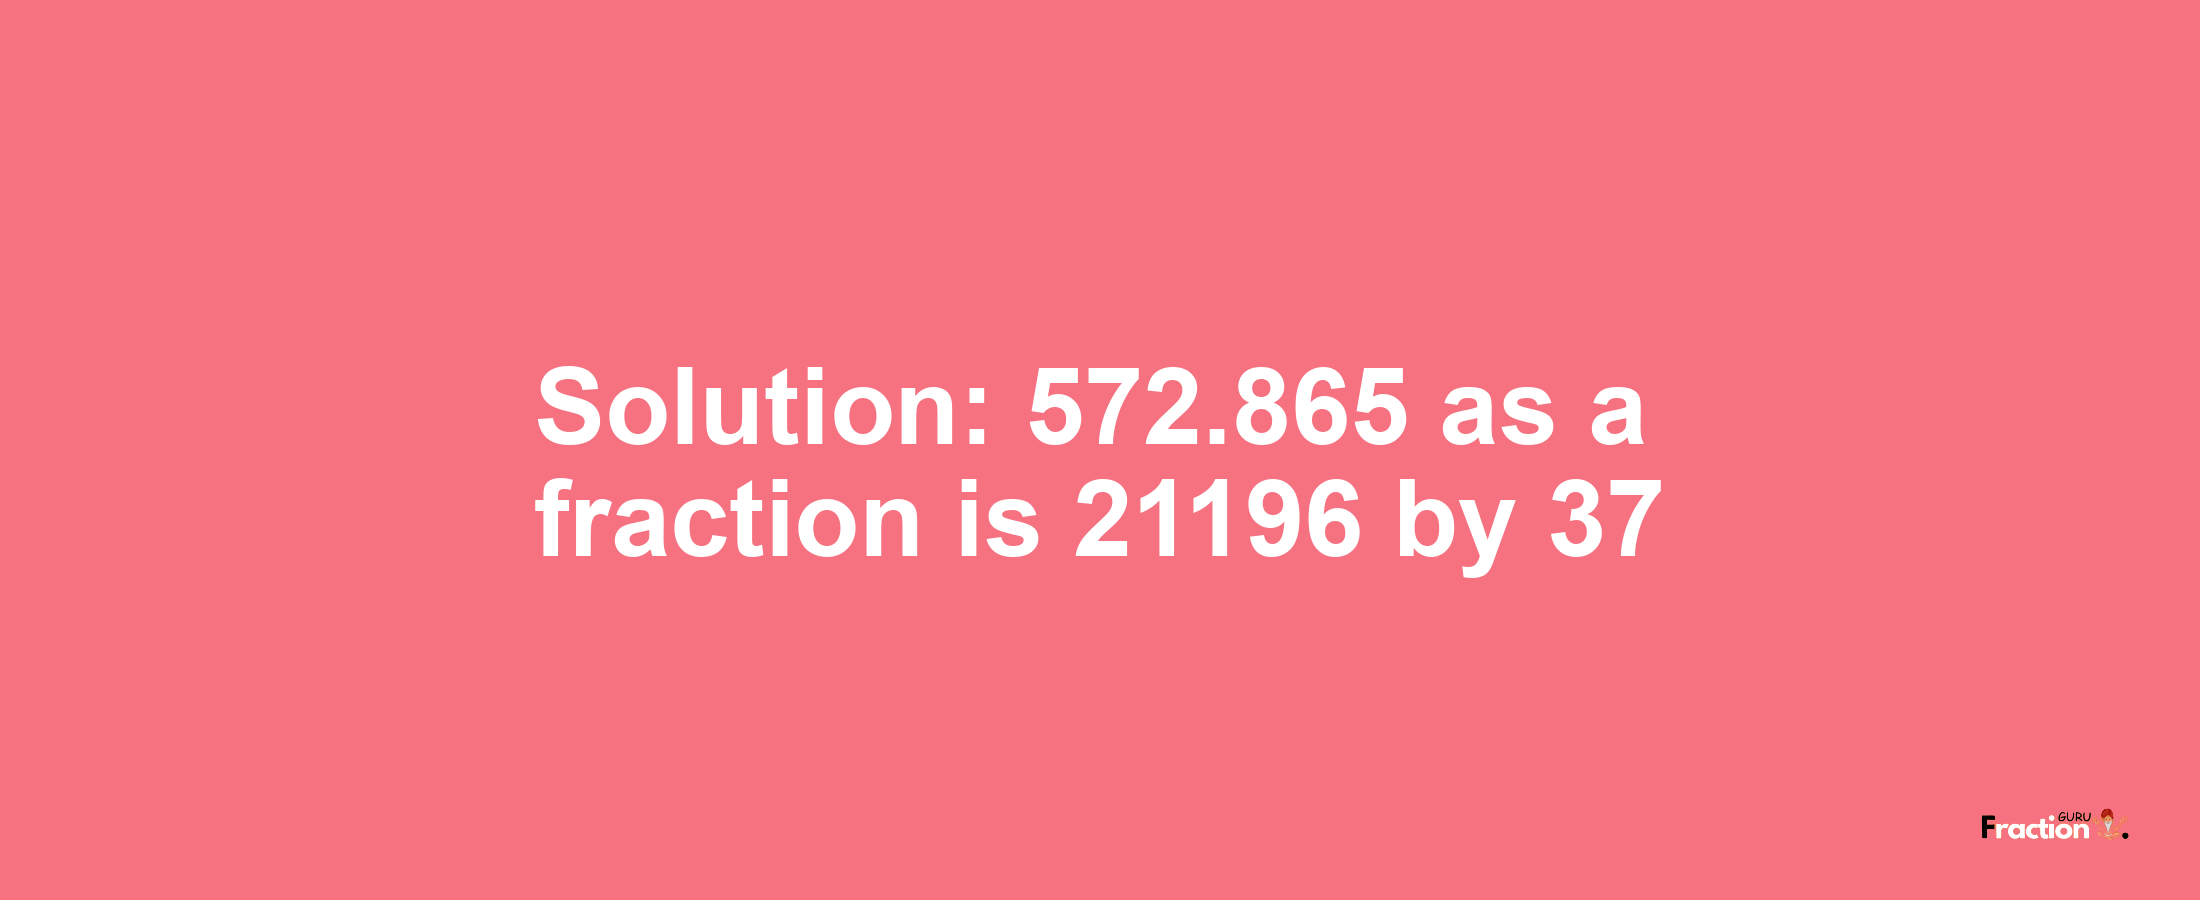 Solution:572.865 as a fraction is 21196/37